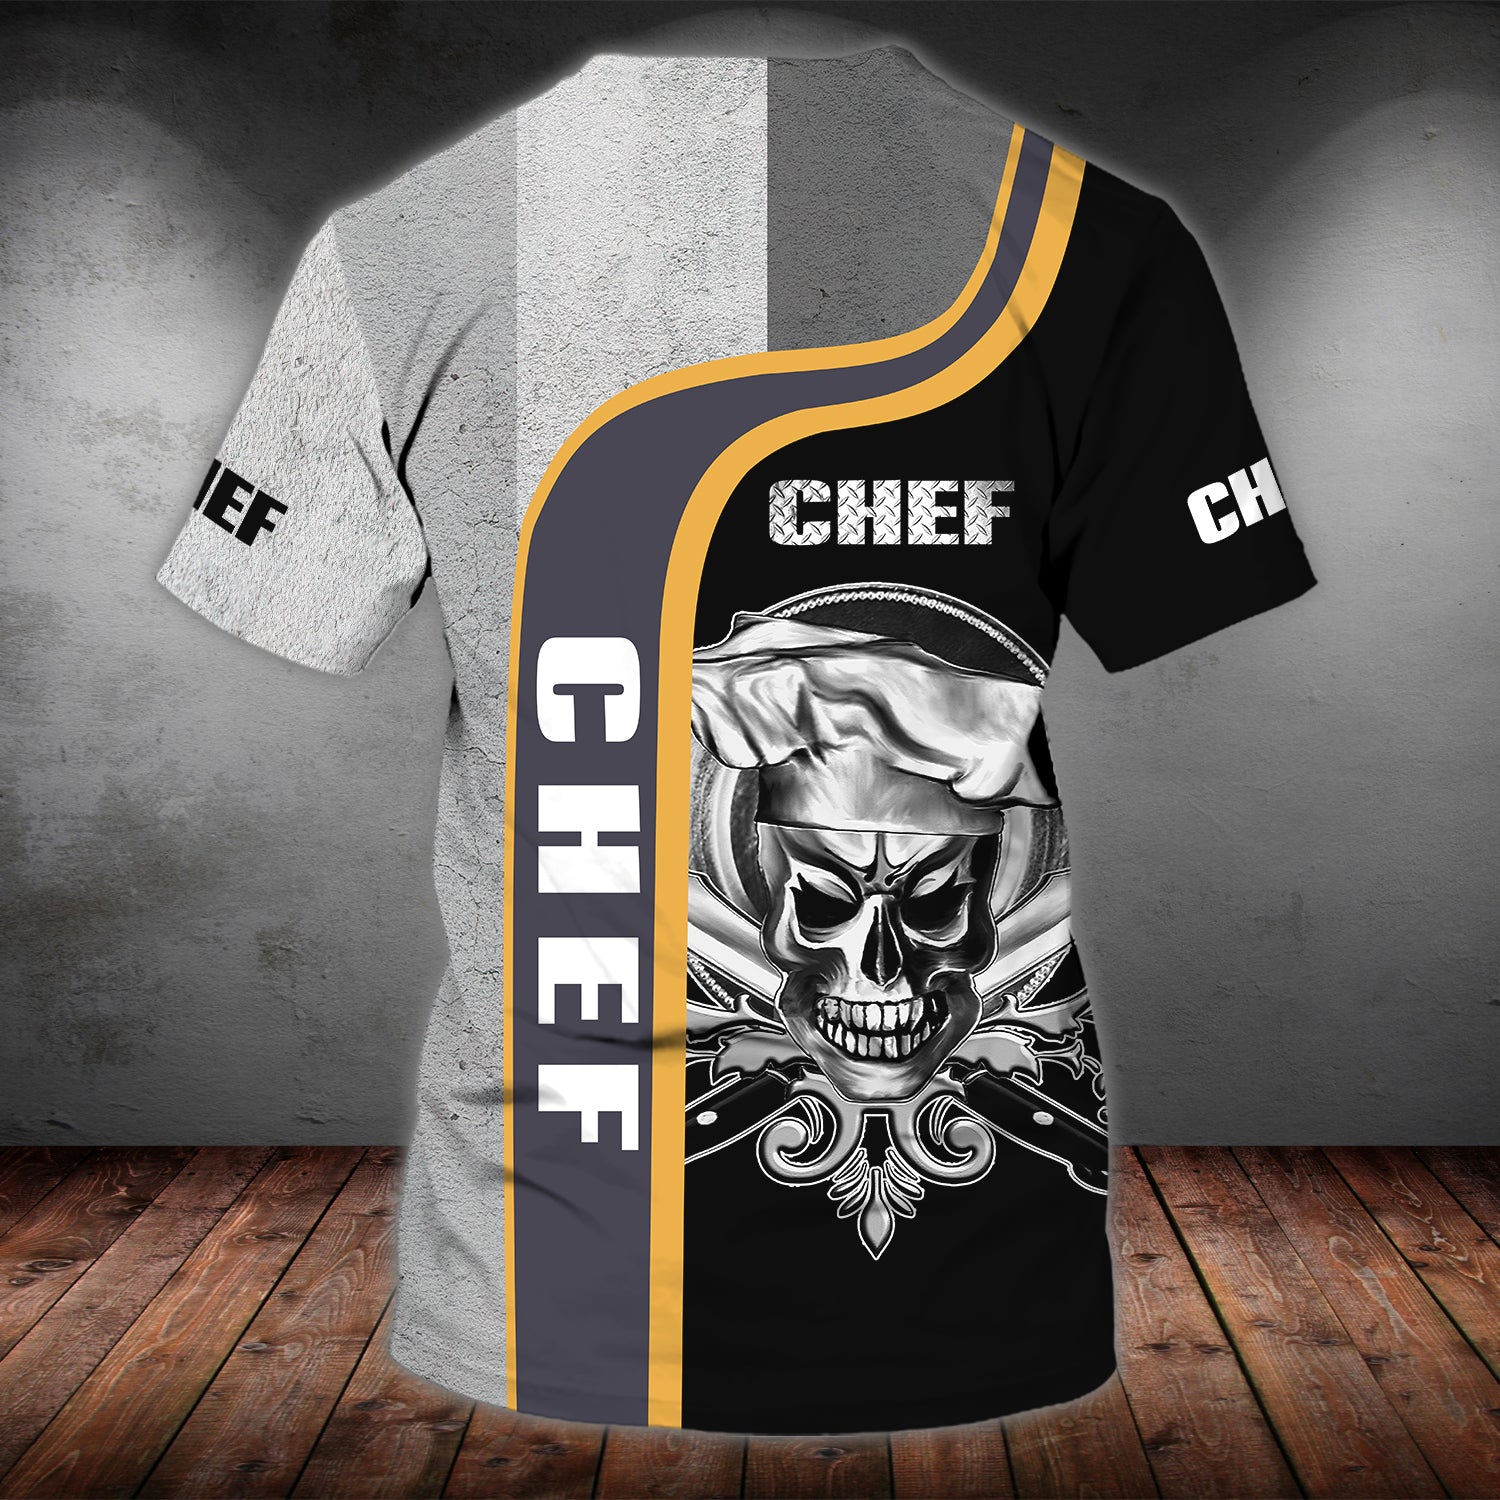 Chef - Personalized Name 3D Tshirt - Dat93-019